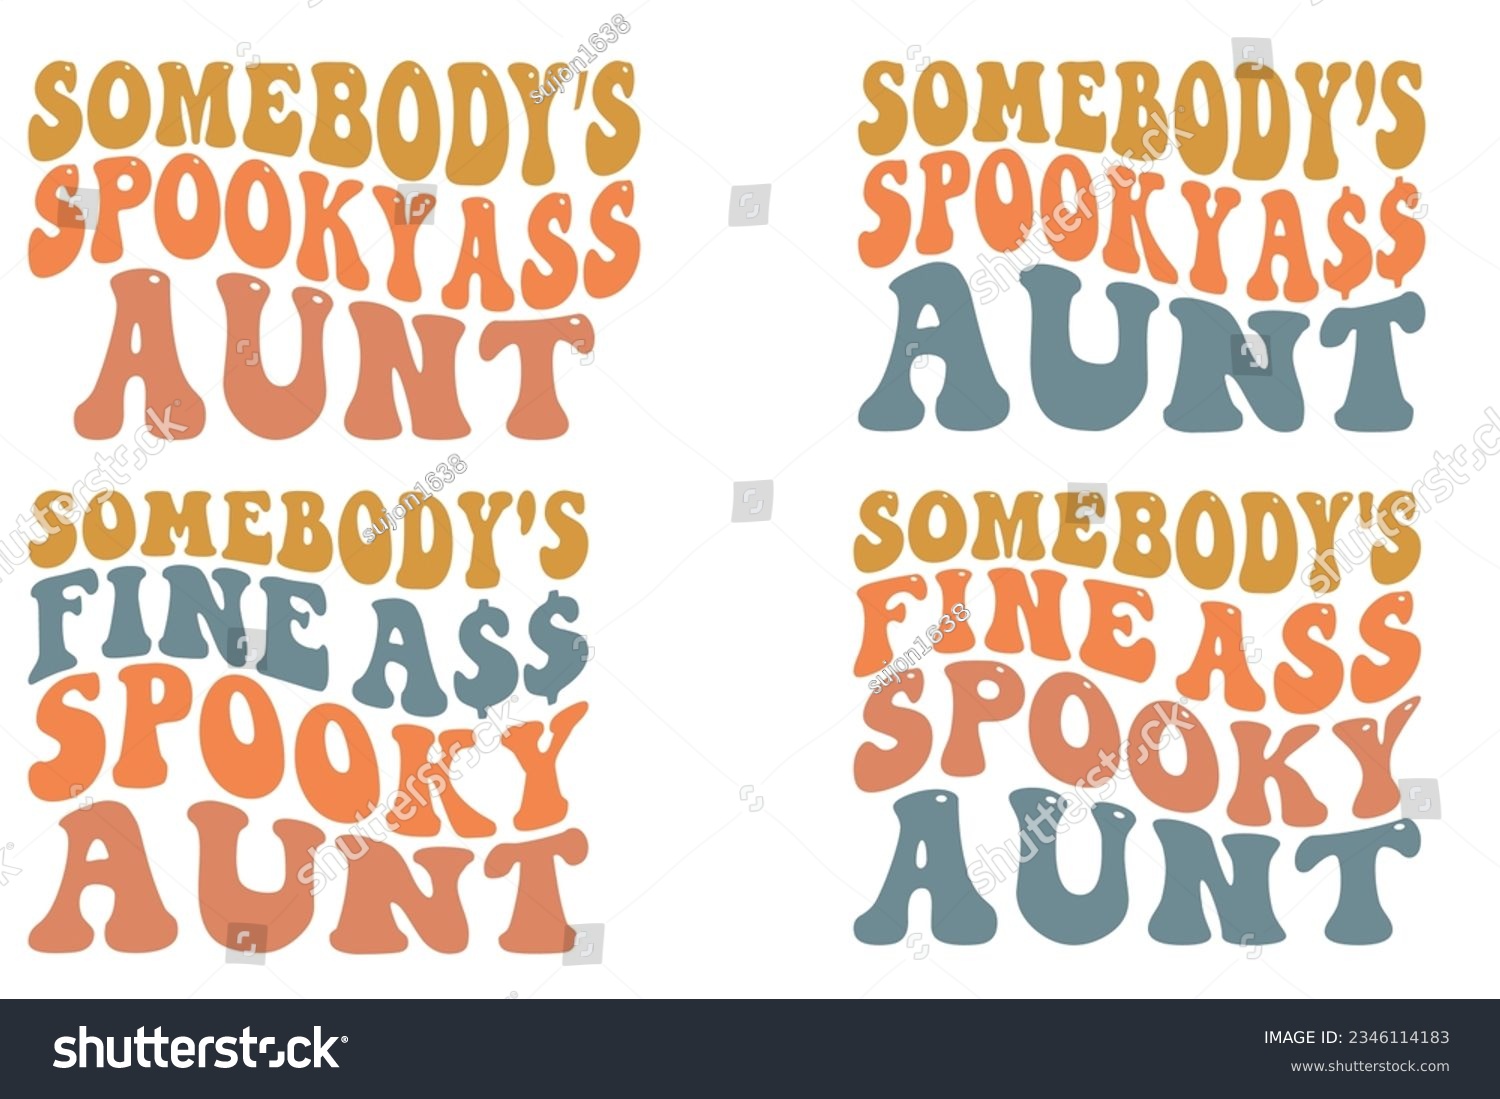 SVG of Somebody’s spooky ass Aunt, Somebody’s fine ass spooky Aunt retro wavy, Halloween SVG t-shirt svg